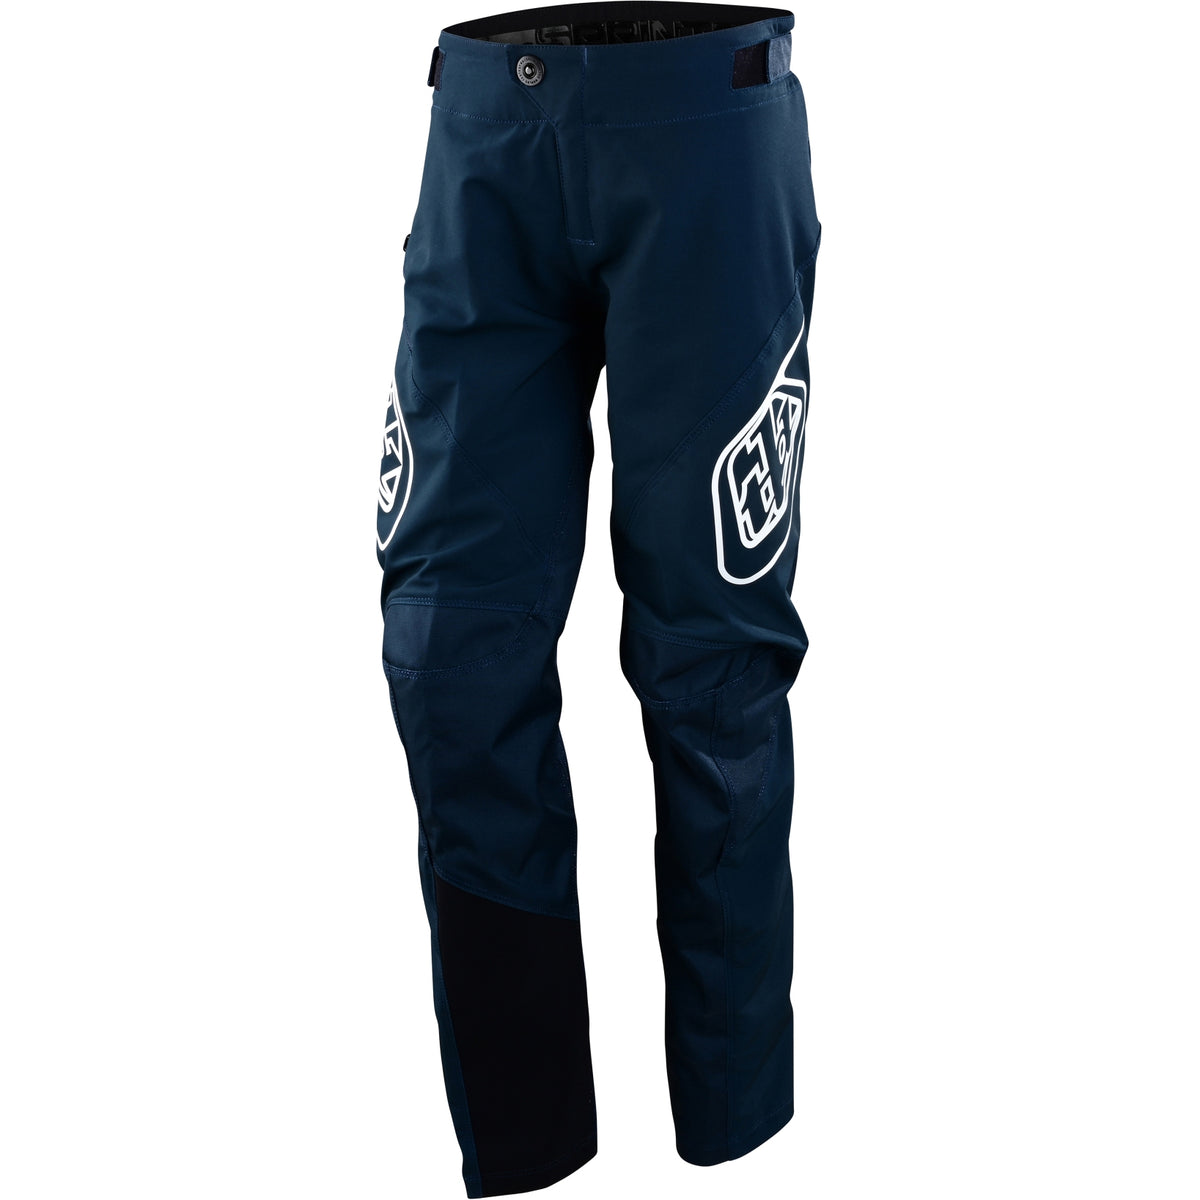 Youth Sprint Pant Solid Navy